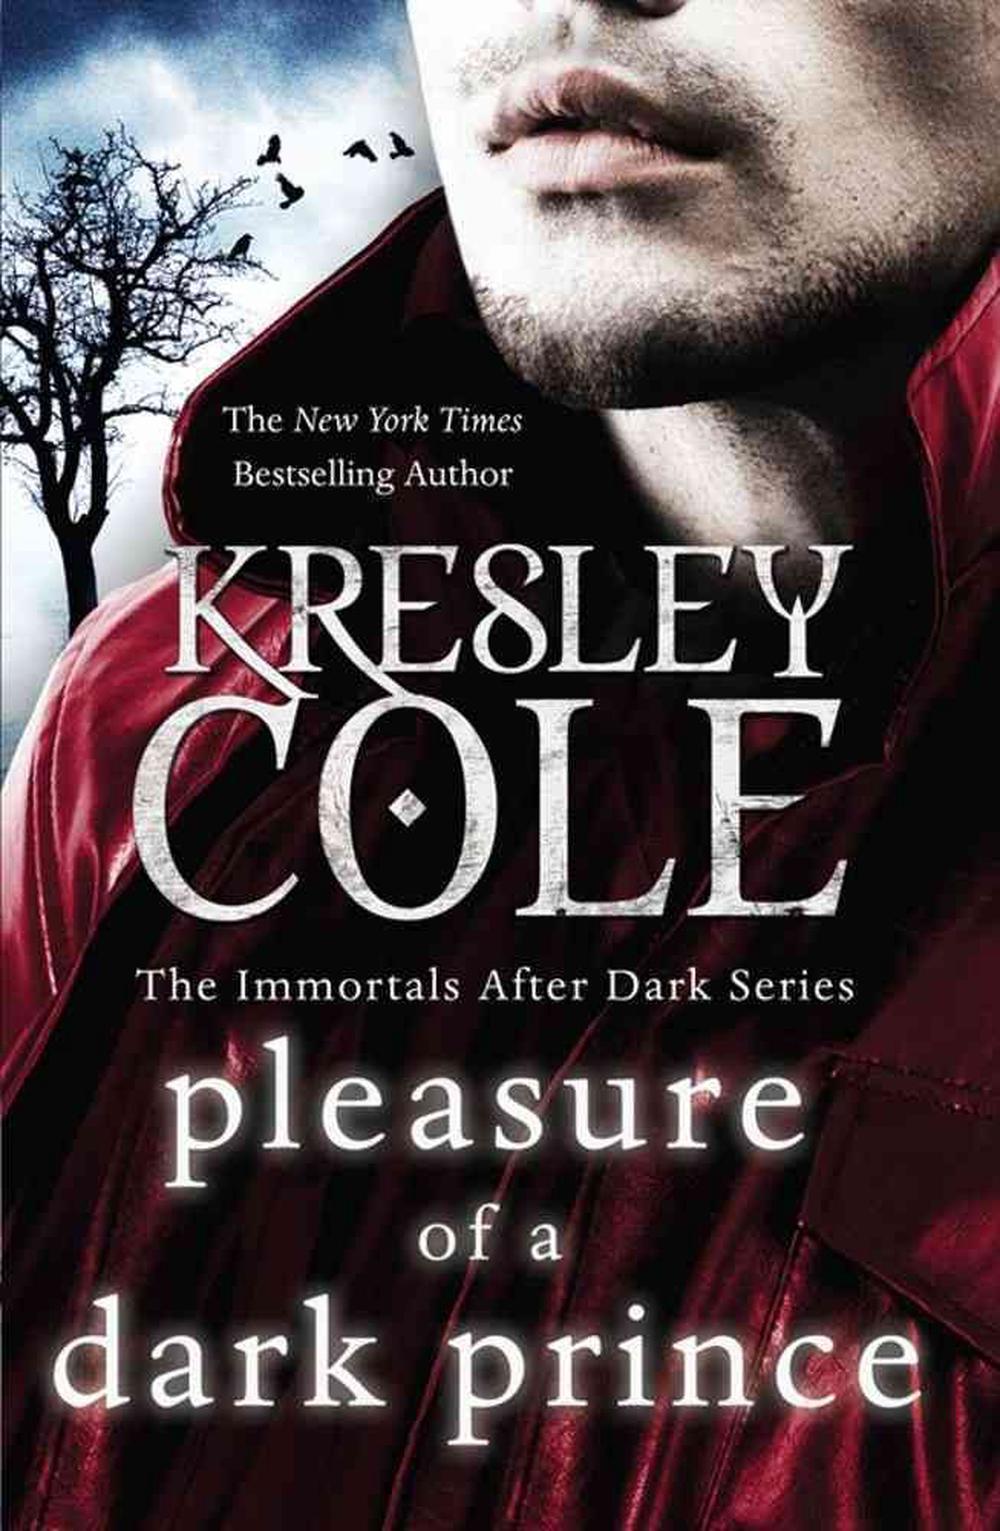 the price of pleasure by kresley cole